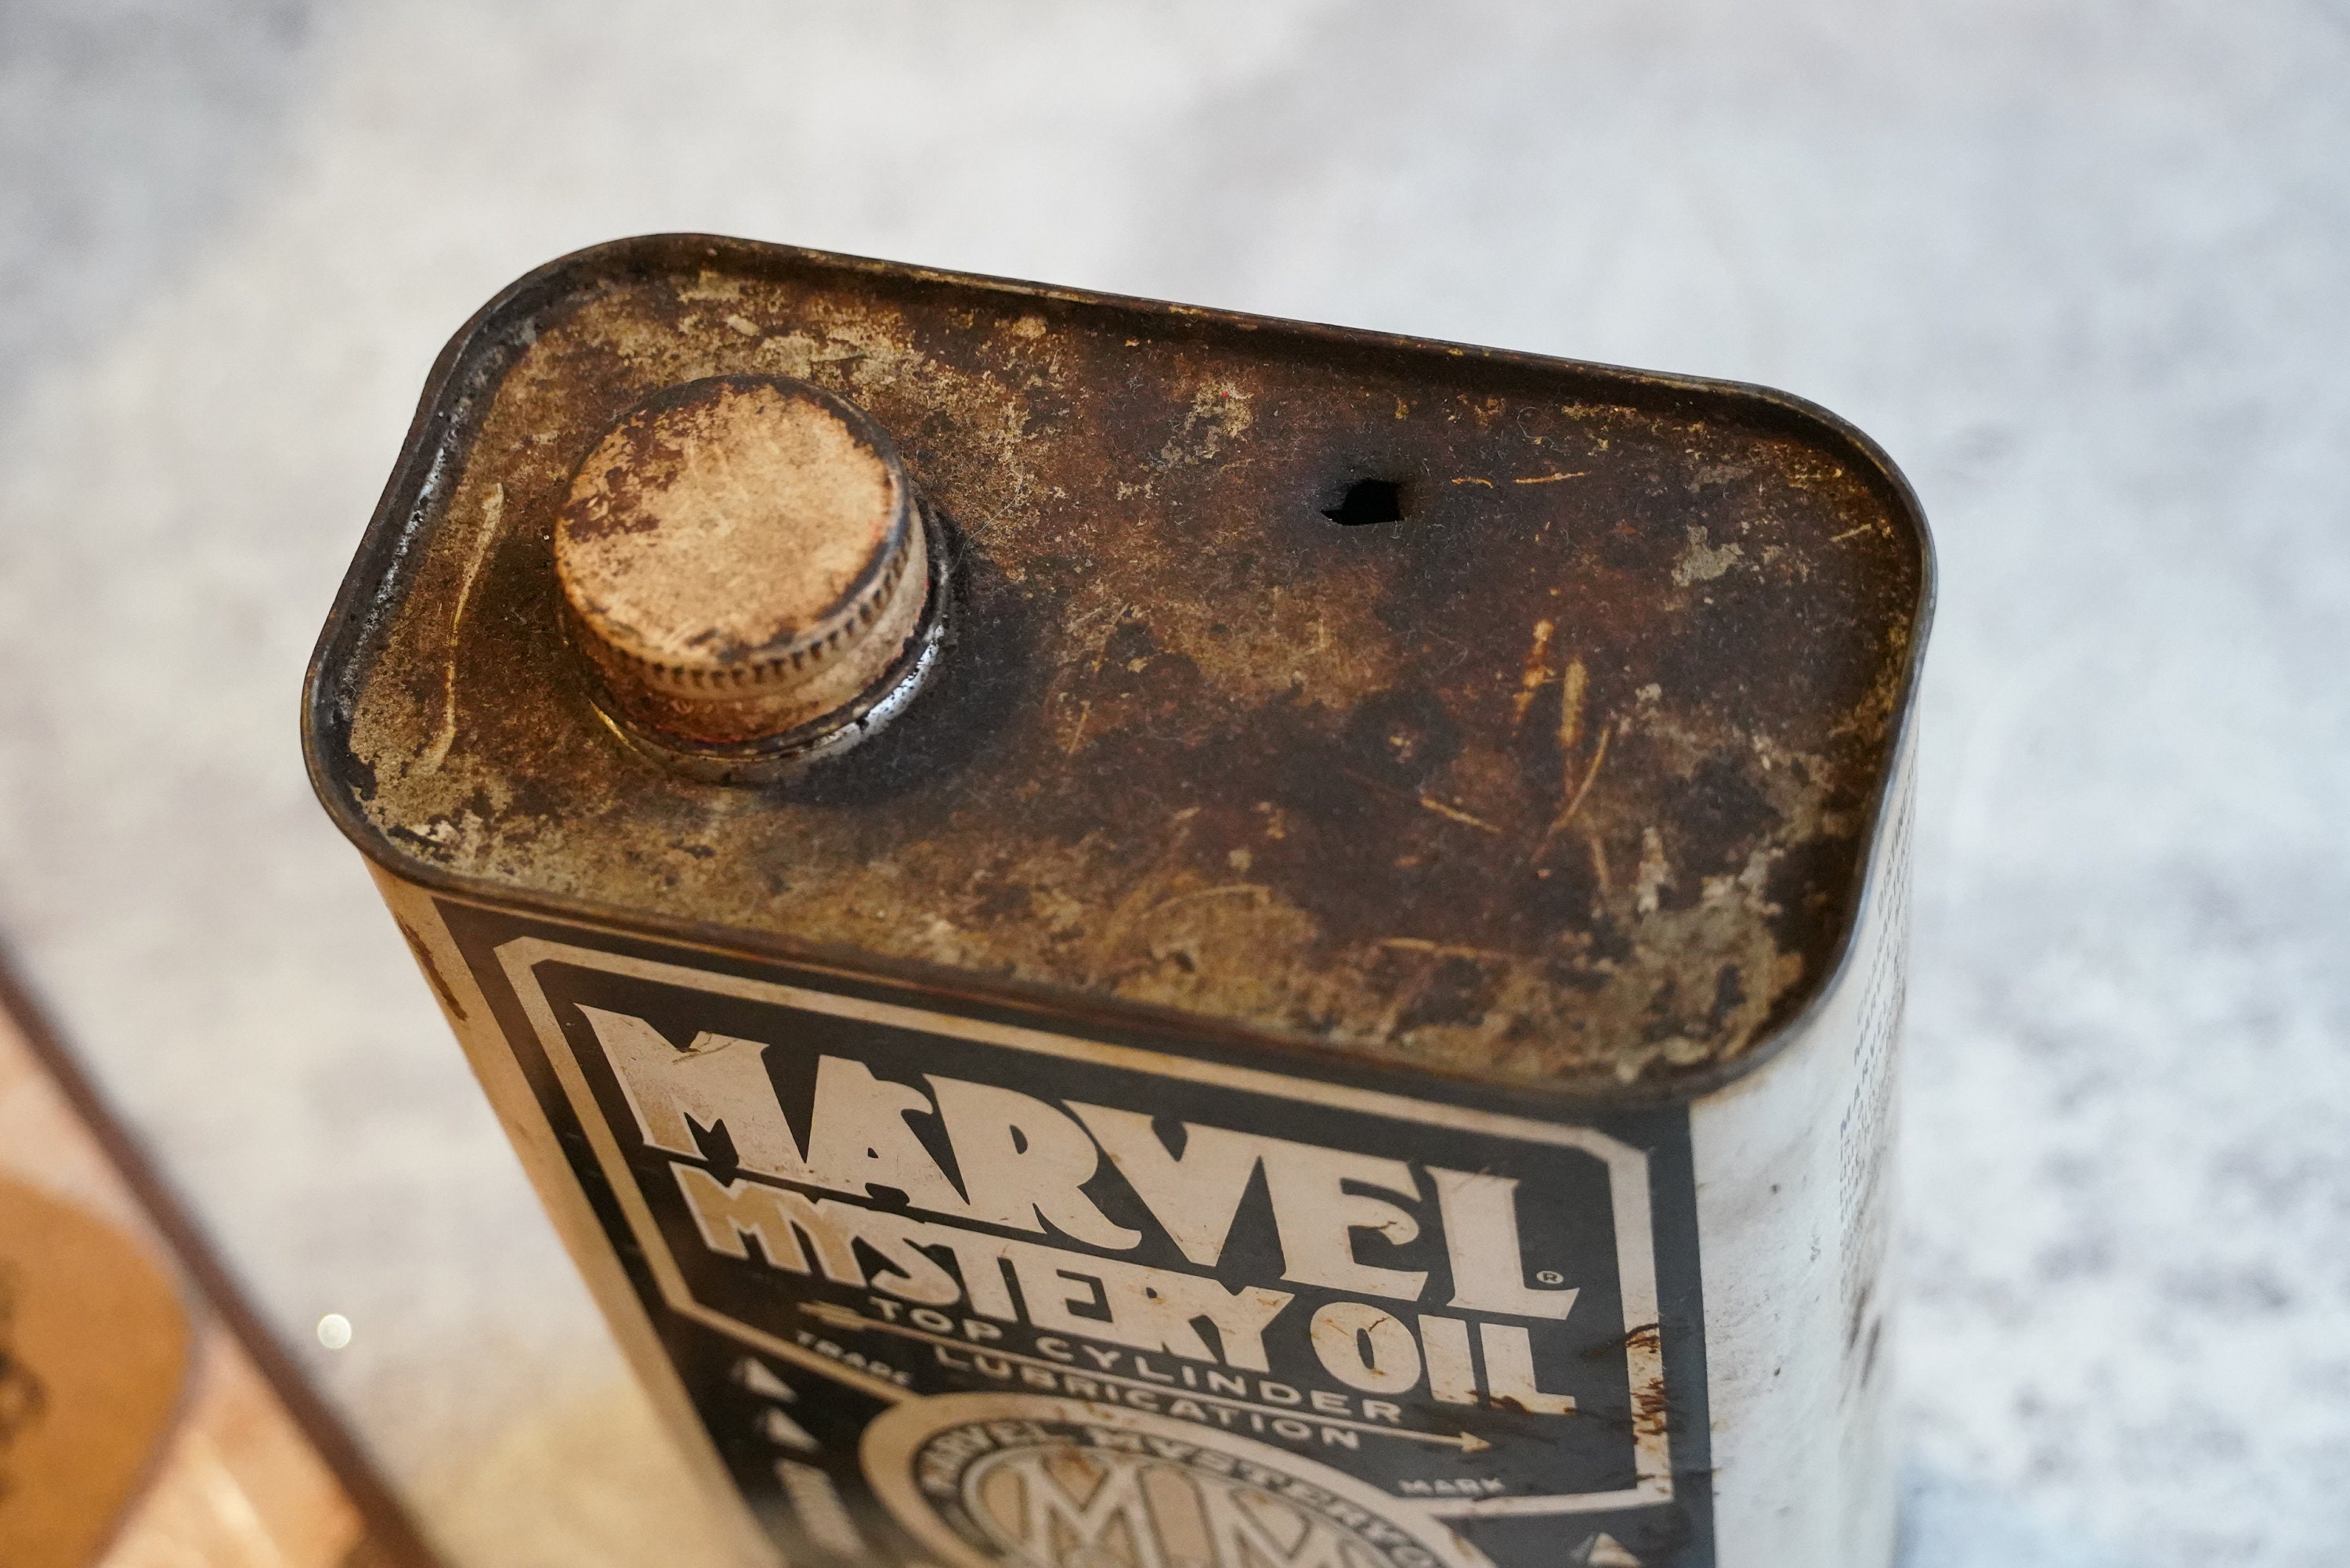 Vintage Marvel Mystery Oil One Quart Can, Lubricant Add to Gas & Oil, Screw  Top, Advertising, Rustic, Distressed, Garage 